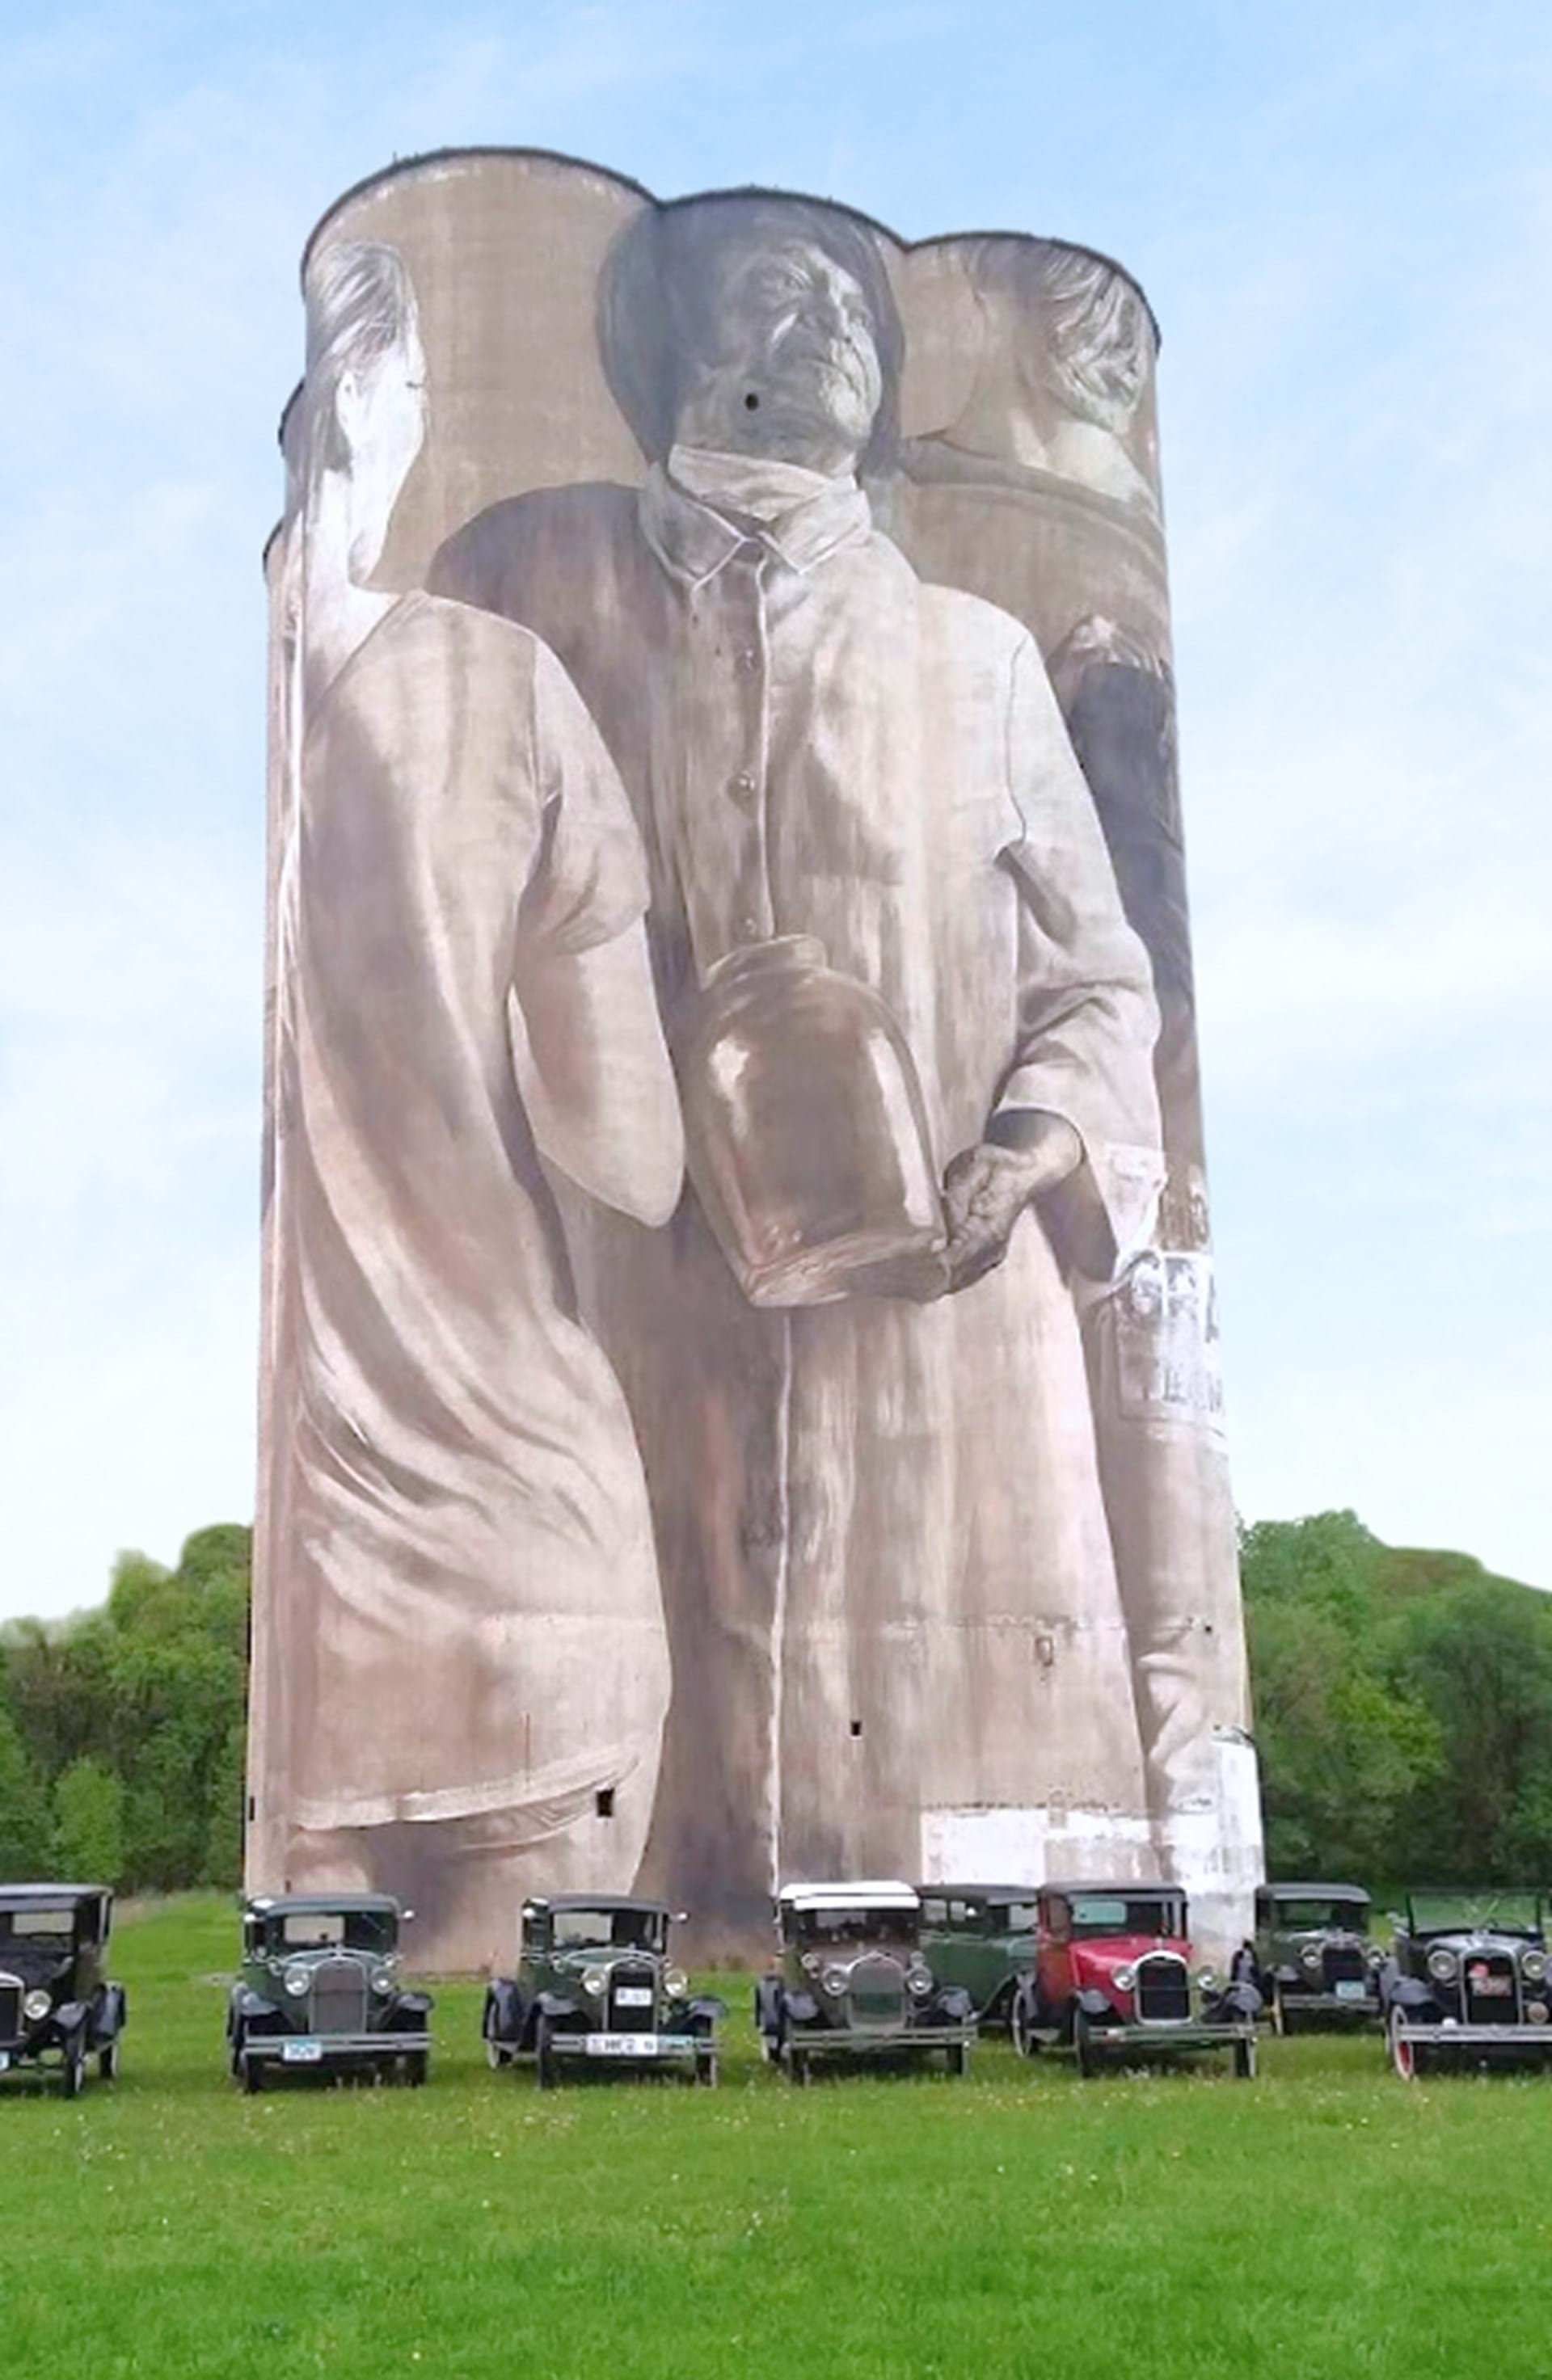 Iowa's largest mural stands 110-feet-tall just across the road from Amigos and is the center of one of the best photo ops in Fort Dodge.